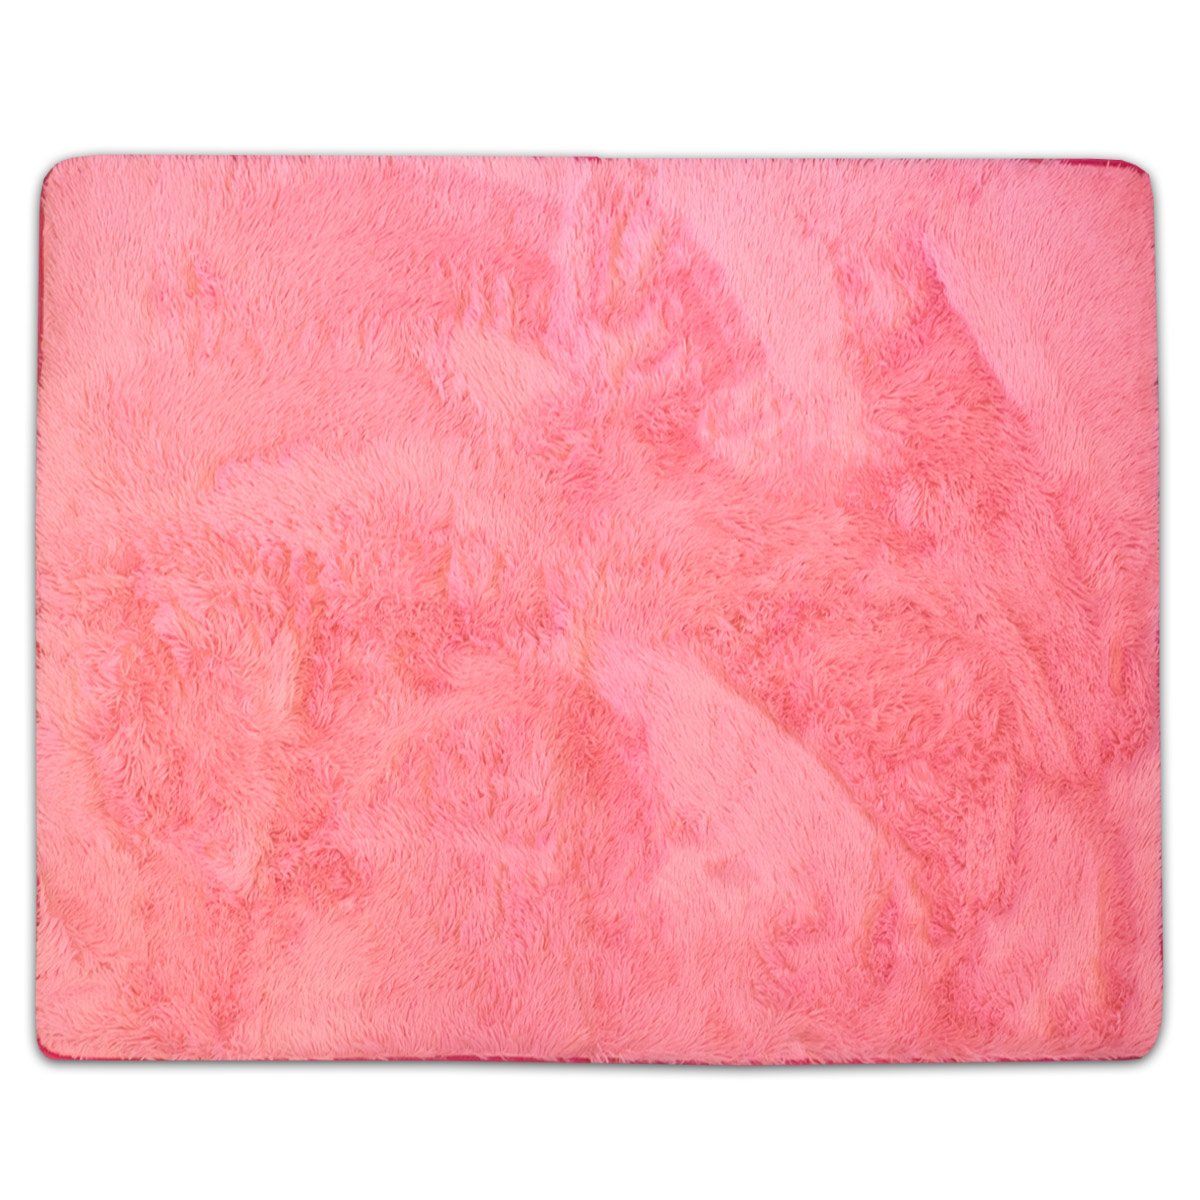 Faux Fur Rectangle Floor Area Rug 4Ft By 5Ft Pink - Top